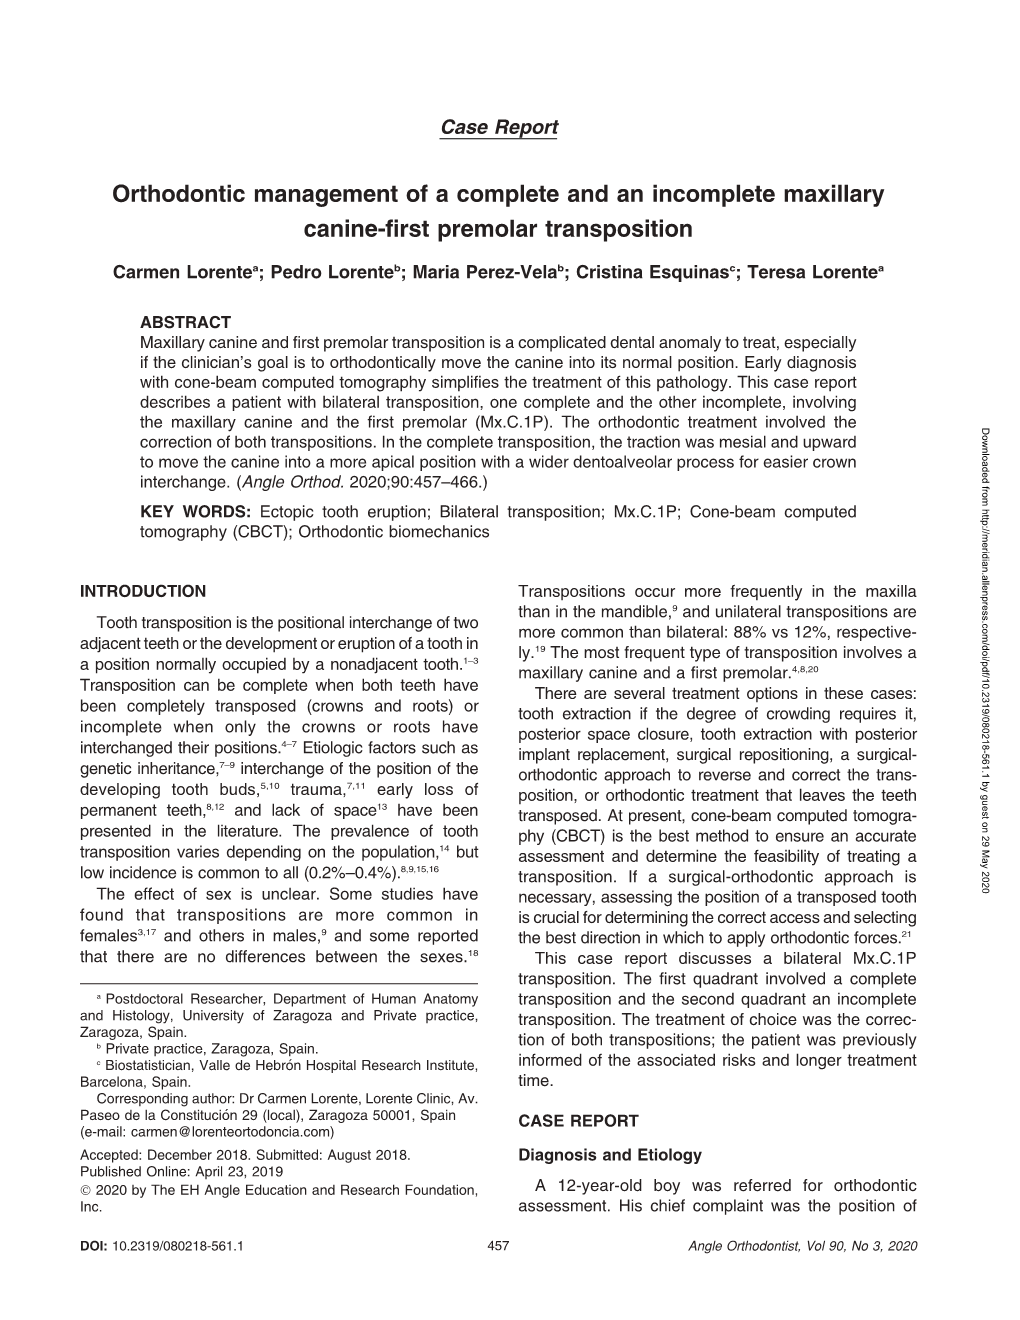 Orthodontic Management of a Complete and an Incomplete Maxillary Canine-First Premolar Transposition